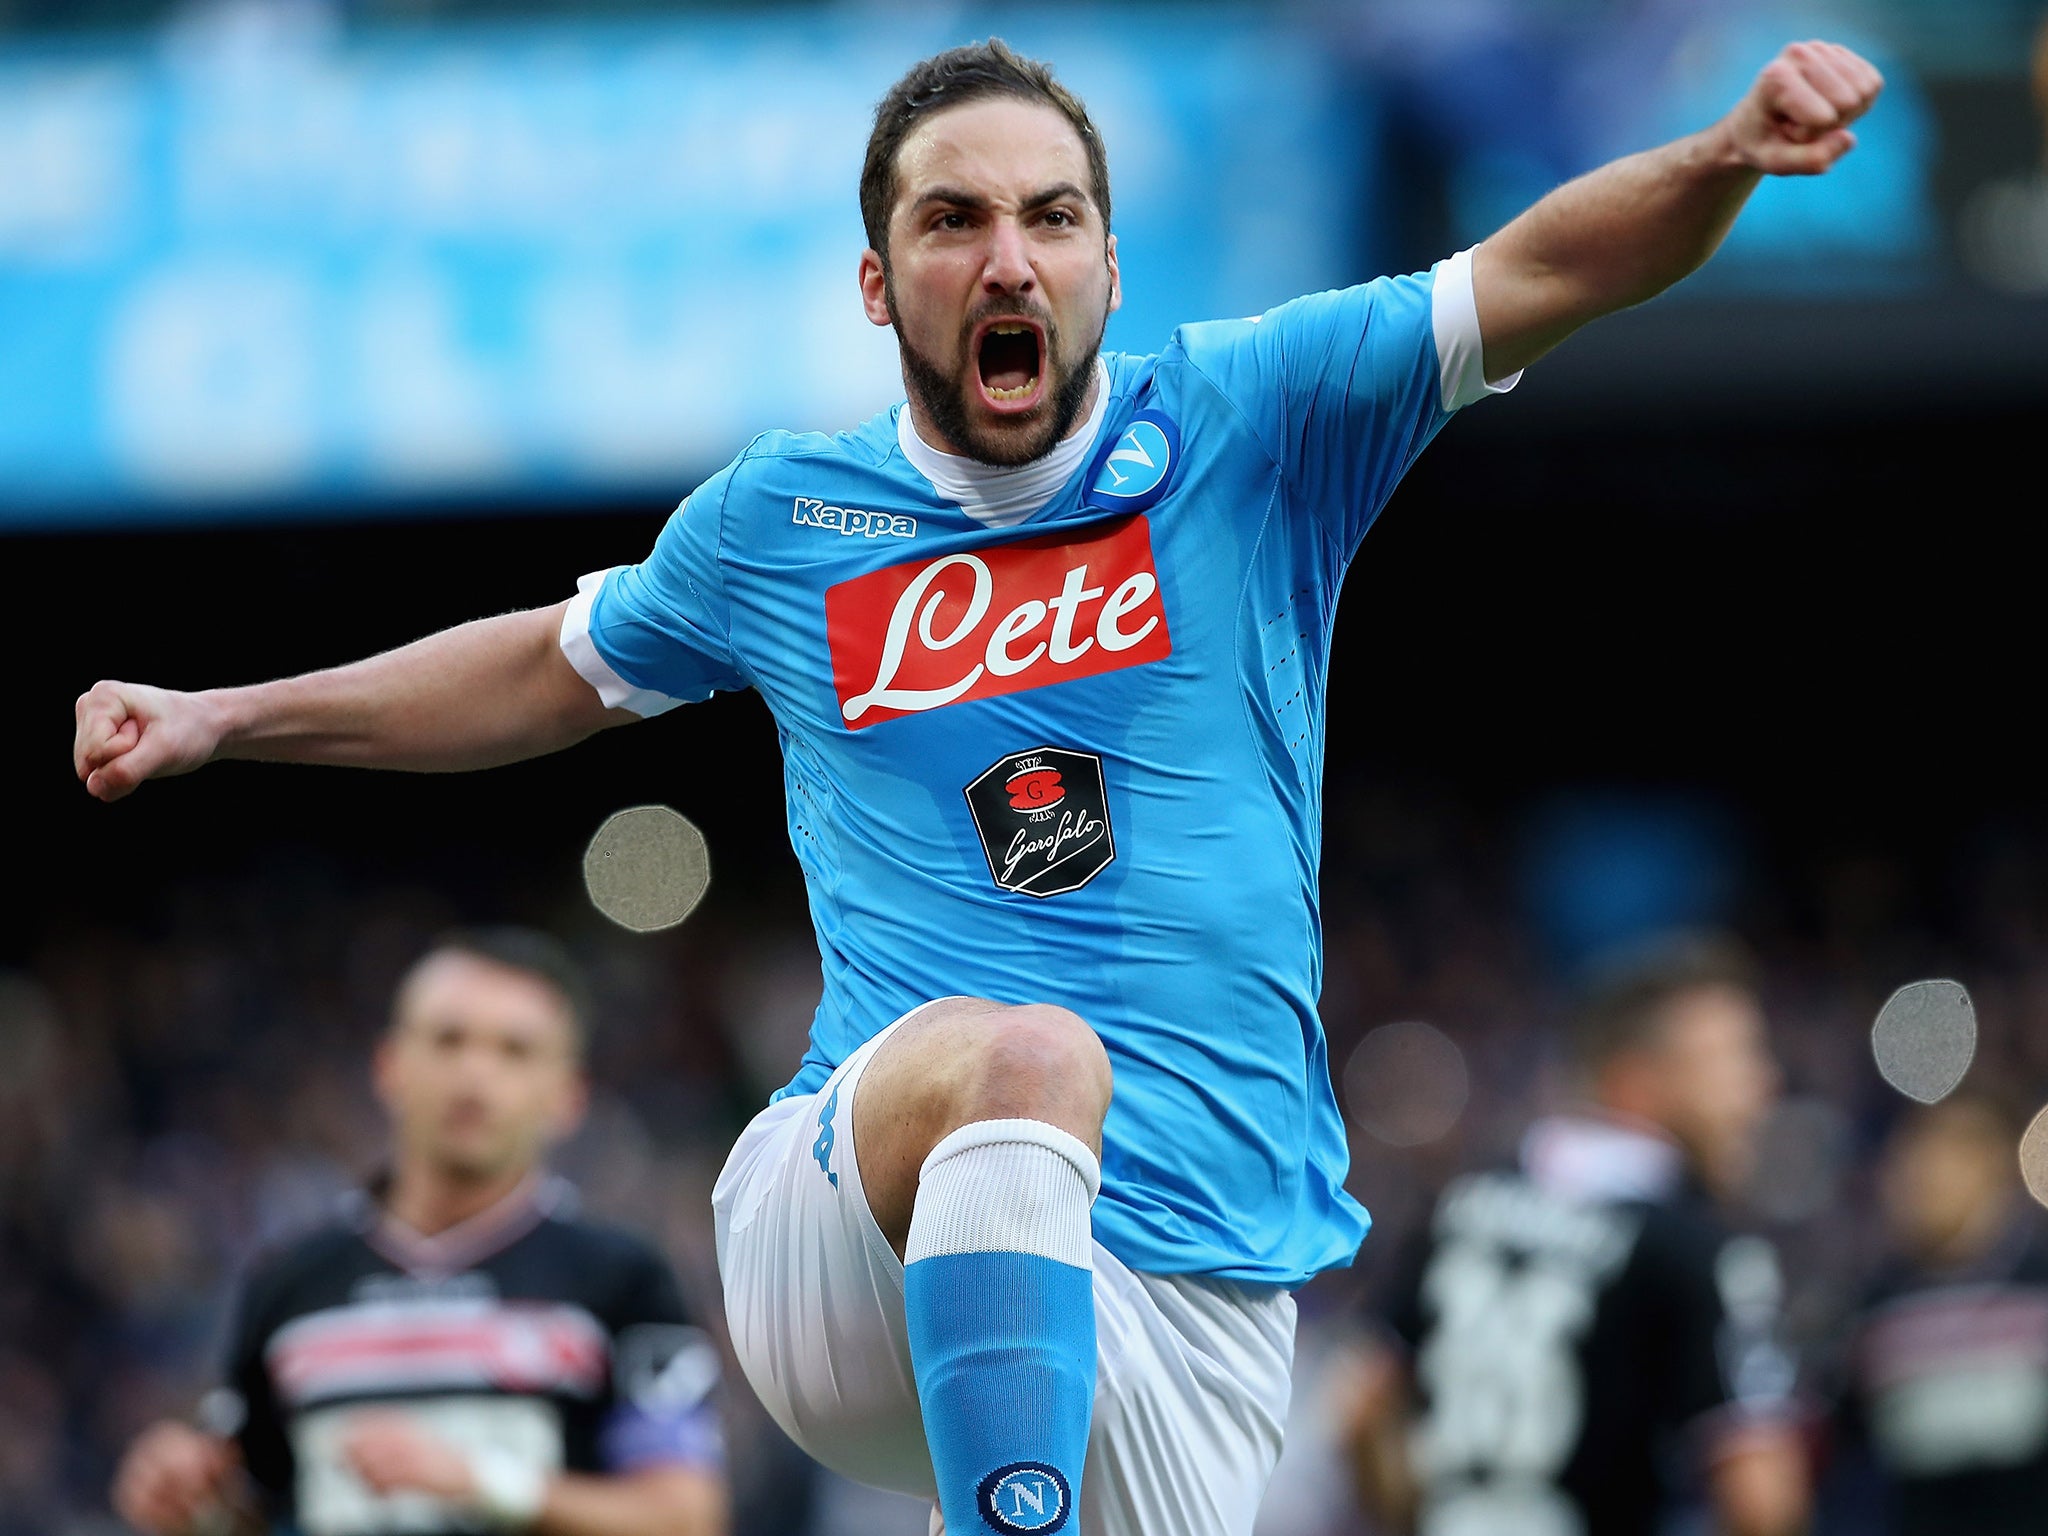 Gonzalo Higuain has enjoyed a record-breaking season with Napoli in Serie A